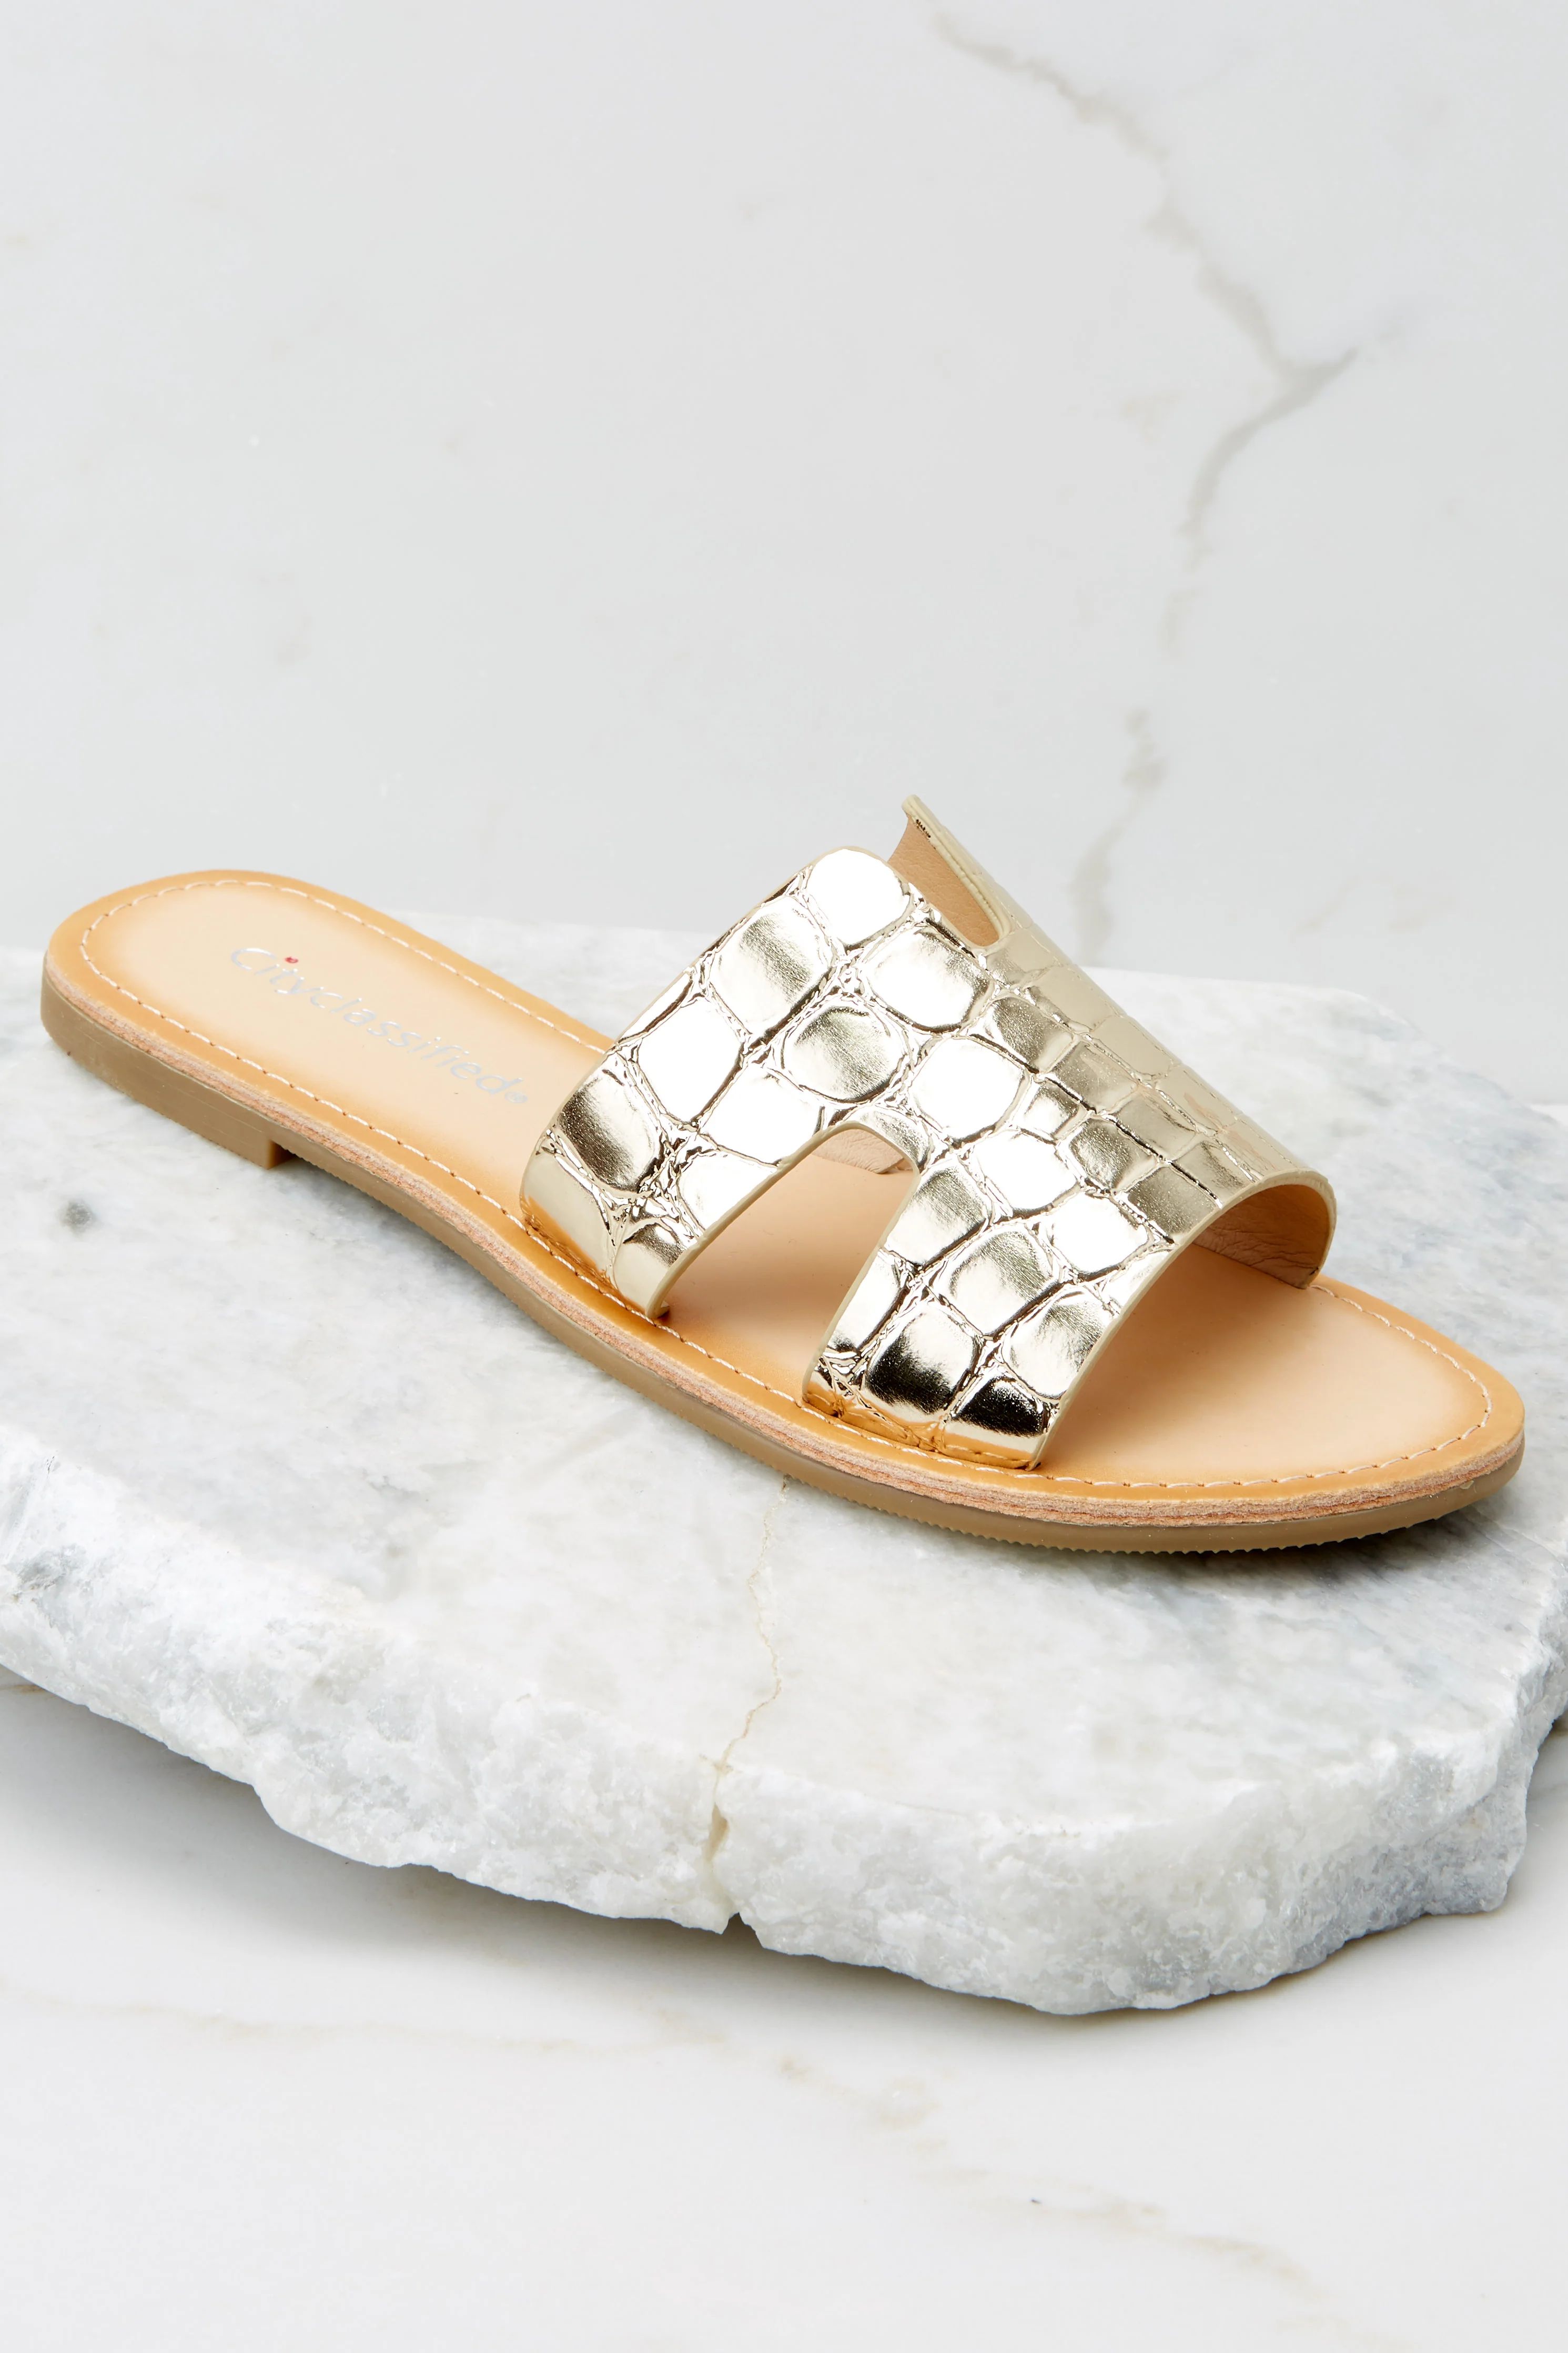 Make Things Easy Gold Crocodile Sandals | Red Dress 